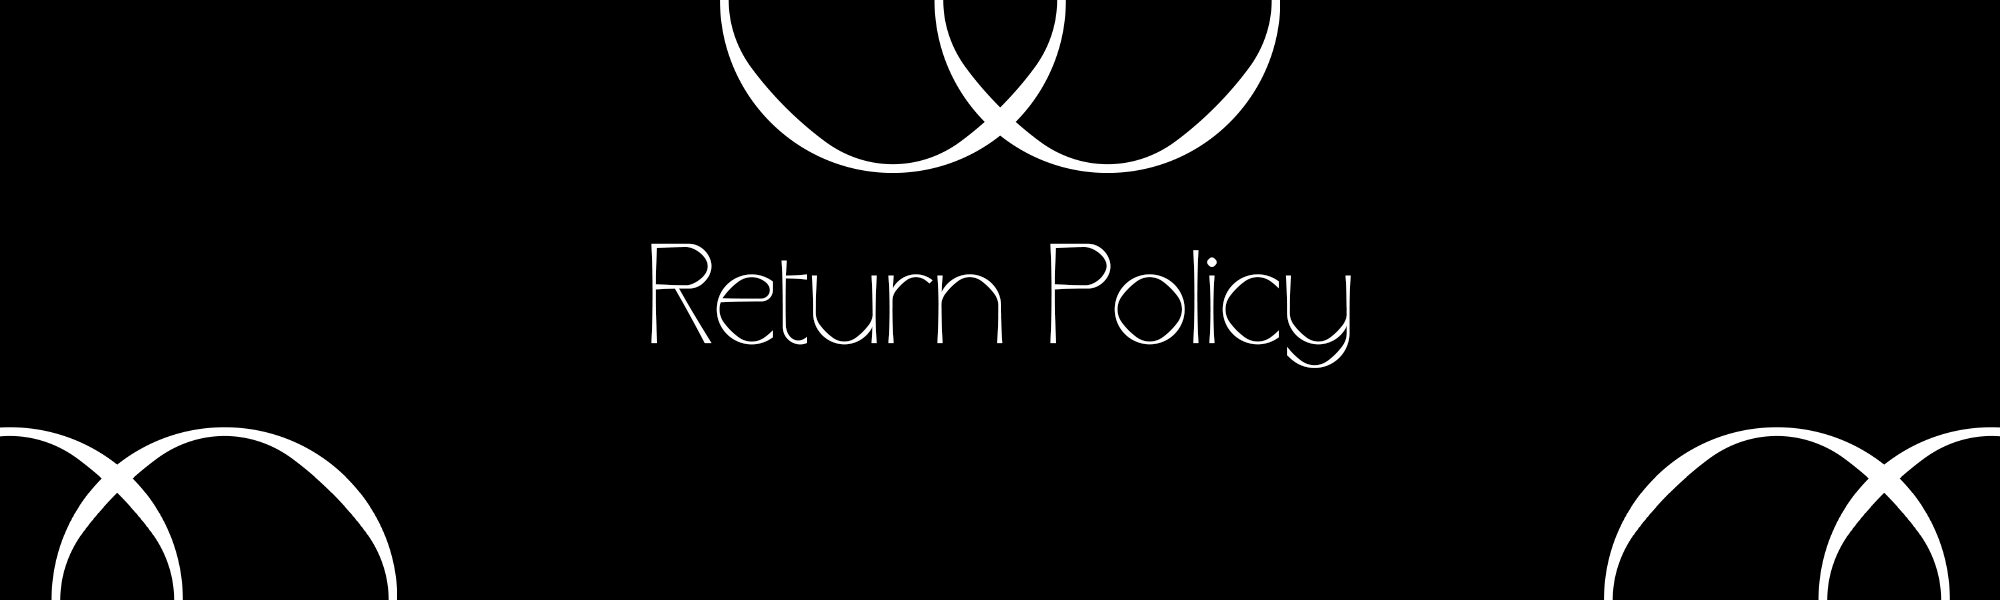 Fulfilled by  Returns and Refunds Policy